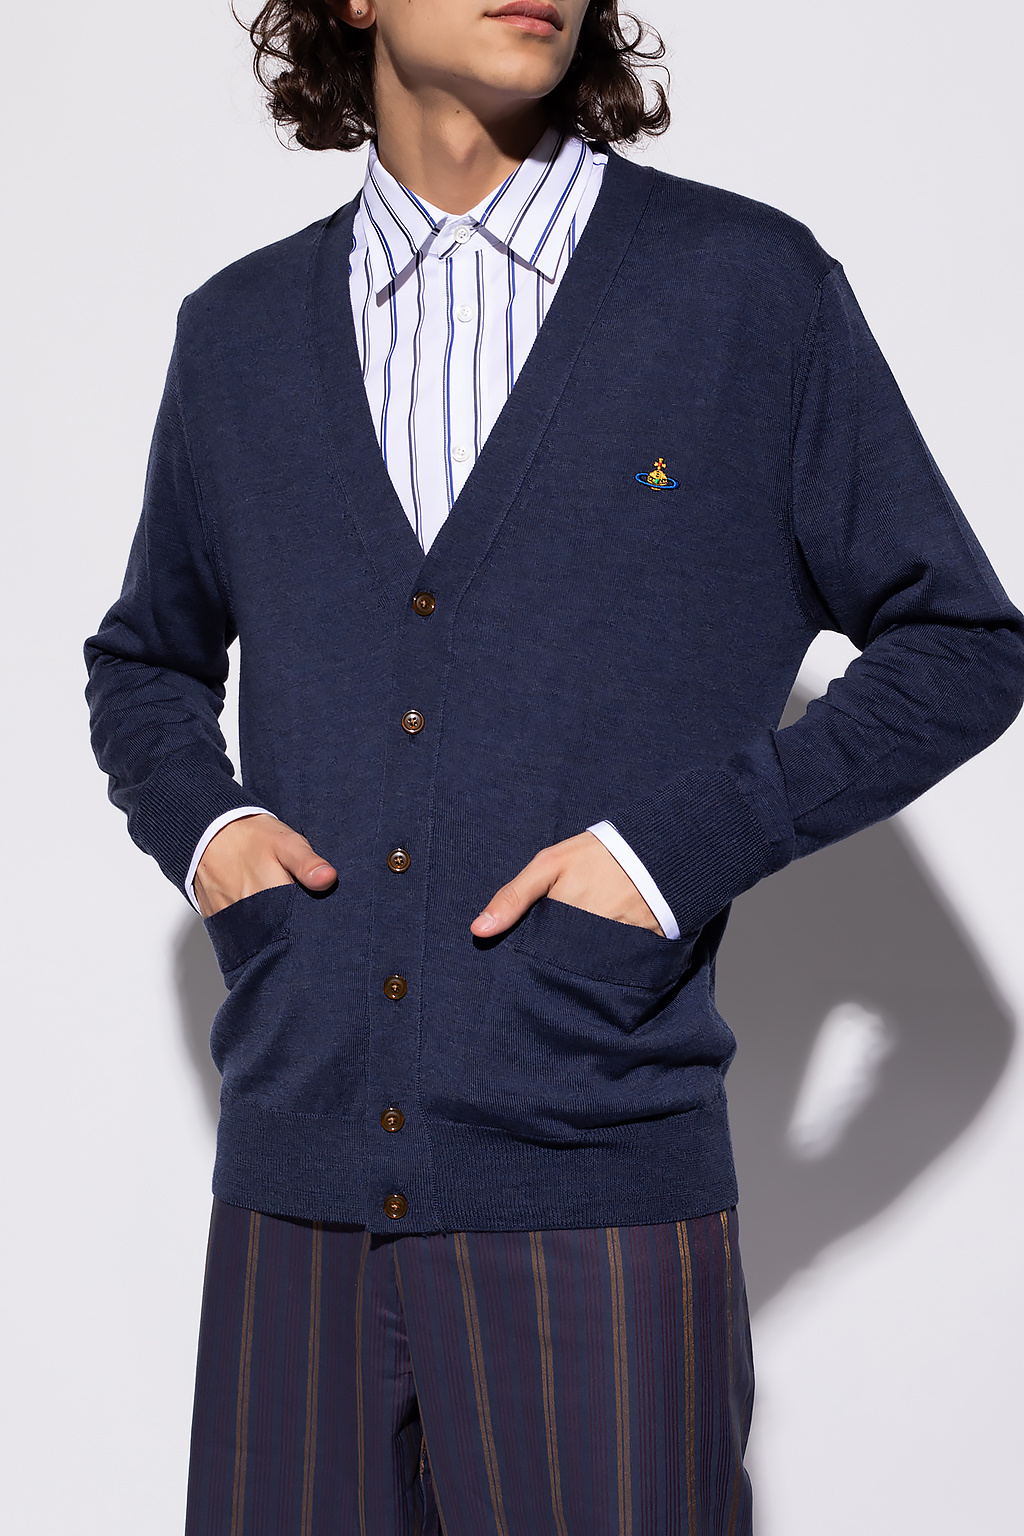 Vivienne Westwood Suit Consisting of full zip sweatshirt with hood and jogging with side bands